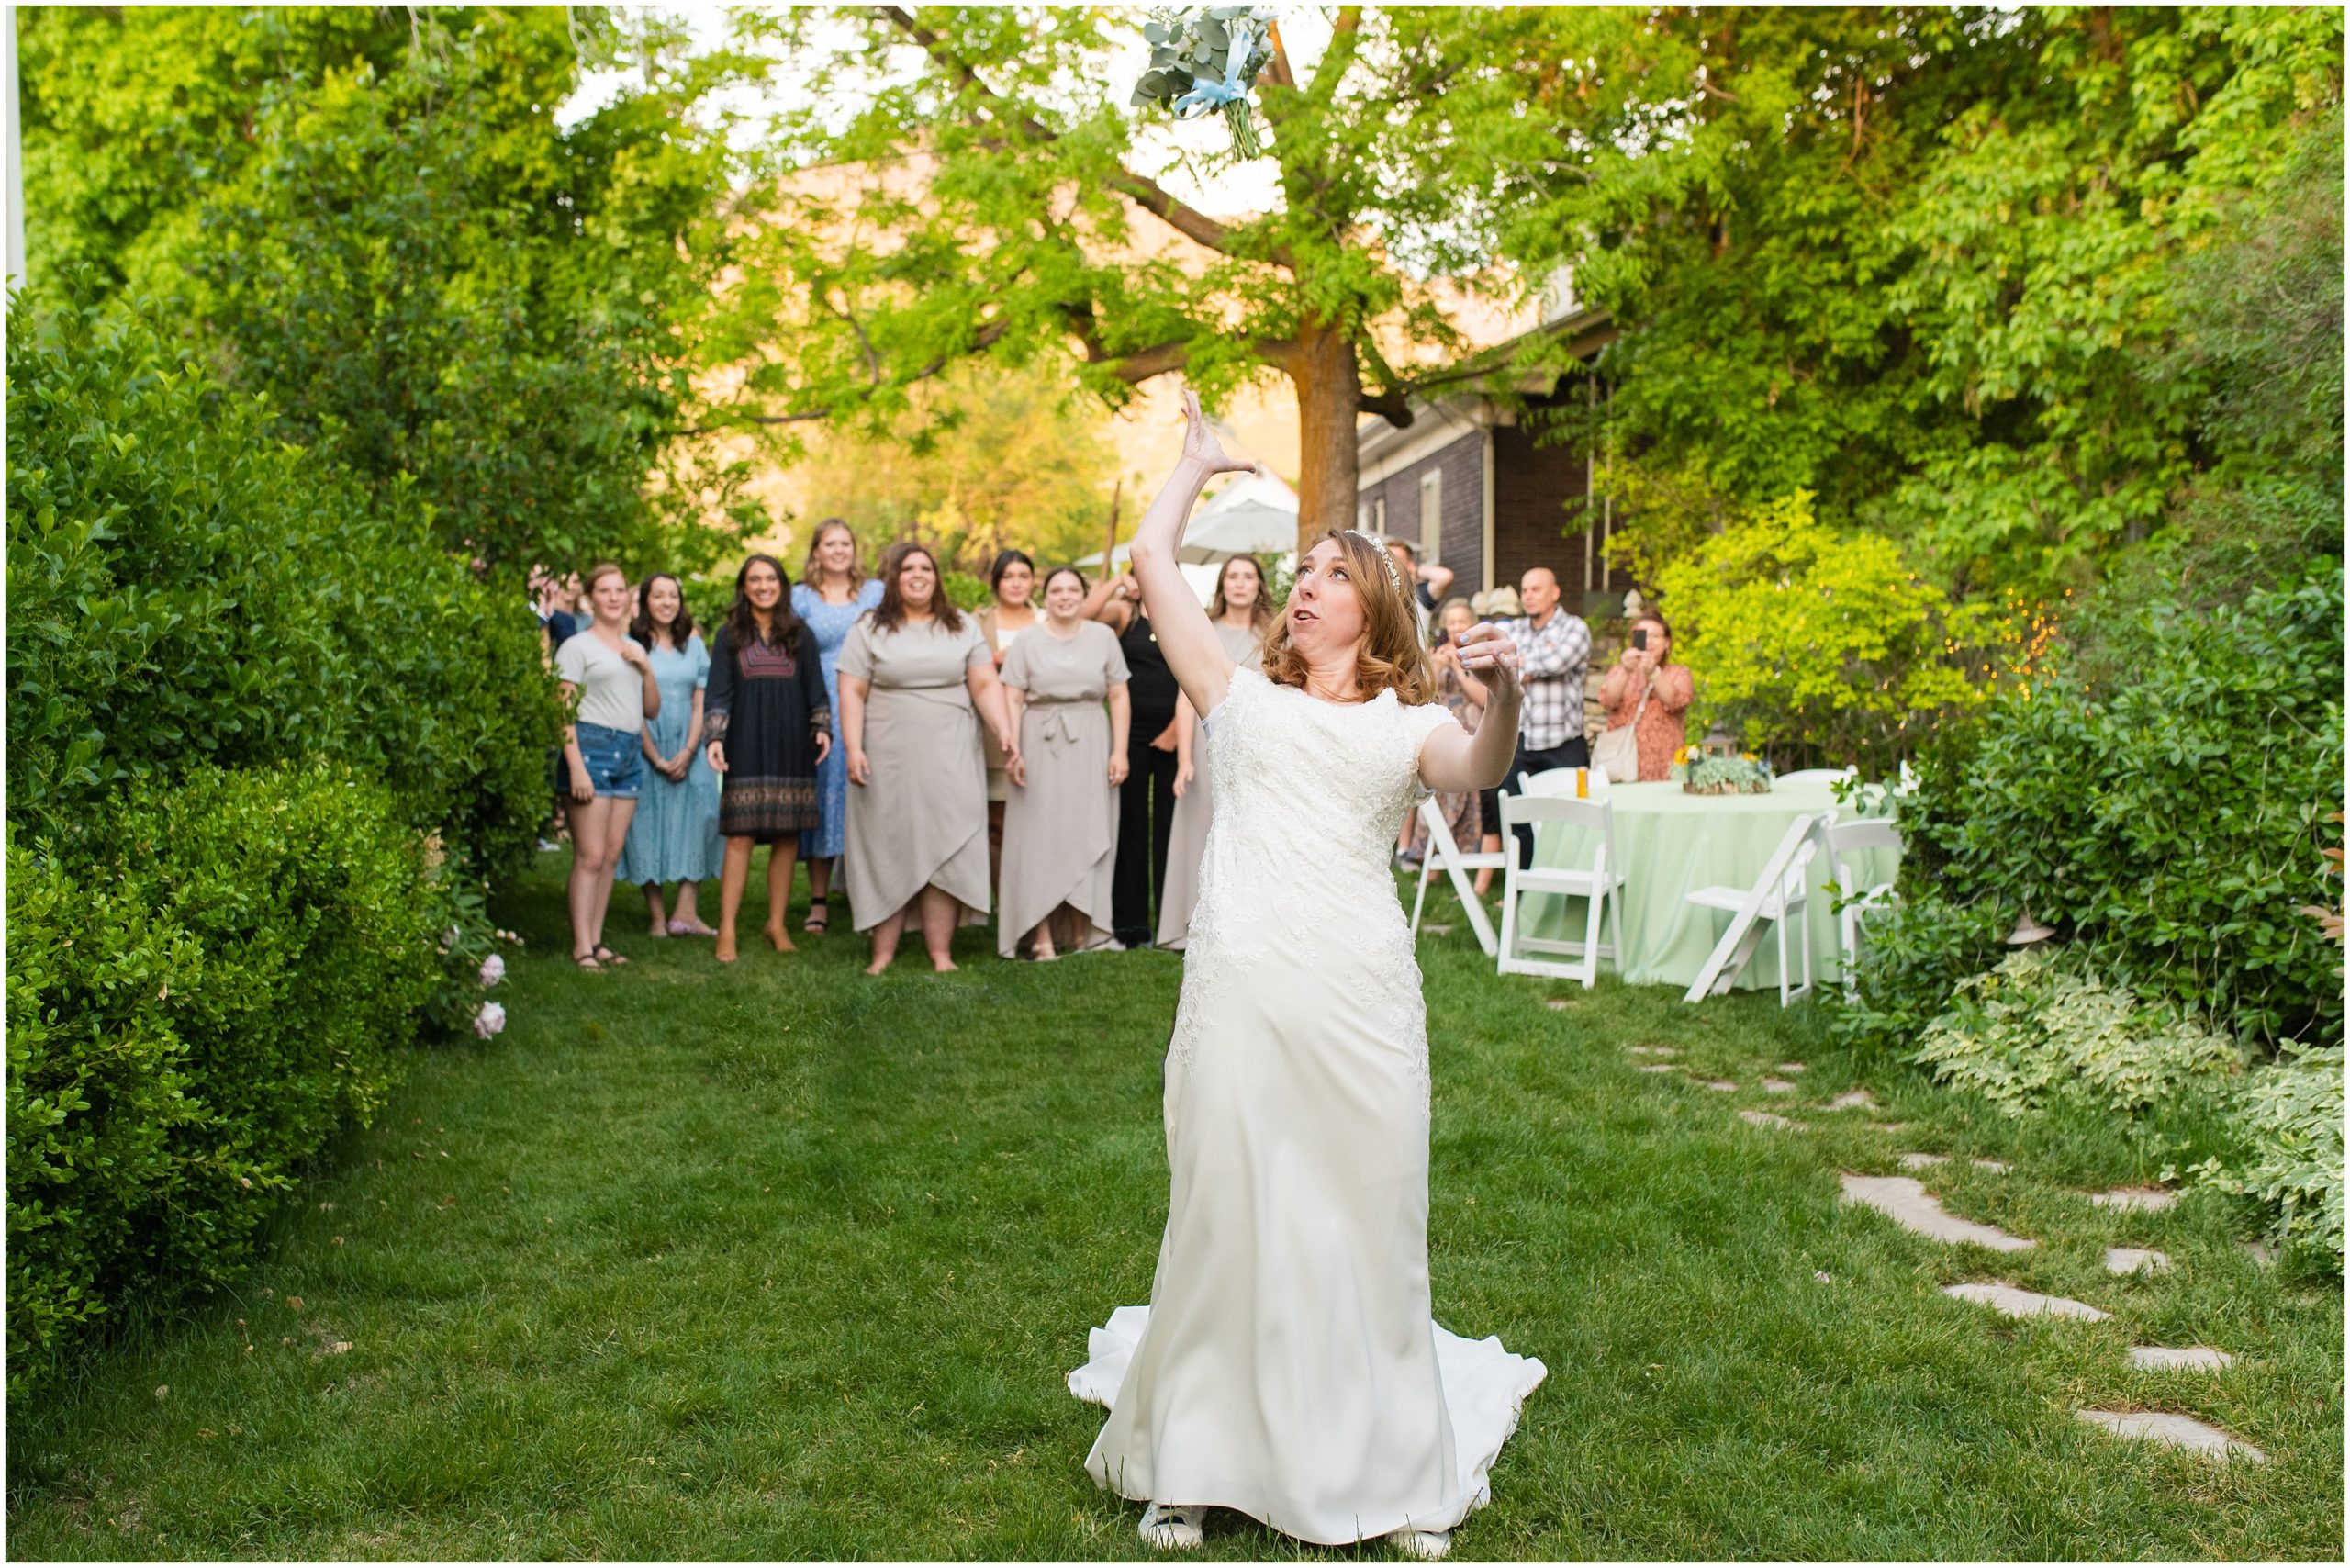 Bouquet toss at reception | Payson Temple and White Willow Wedding | Jessie and Dallin Photography